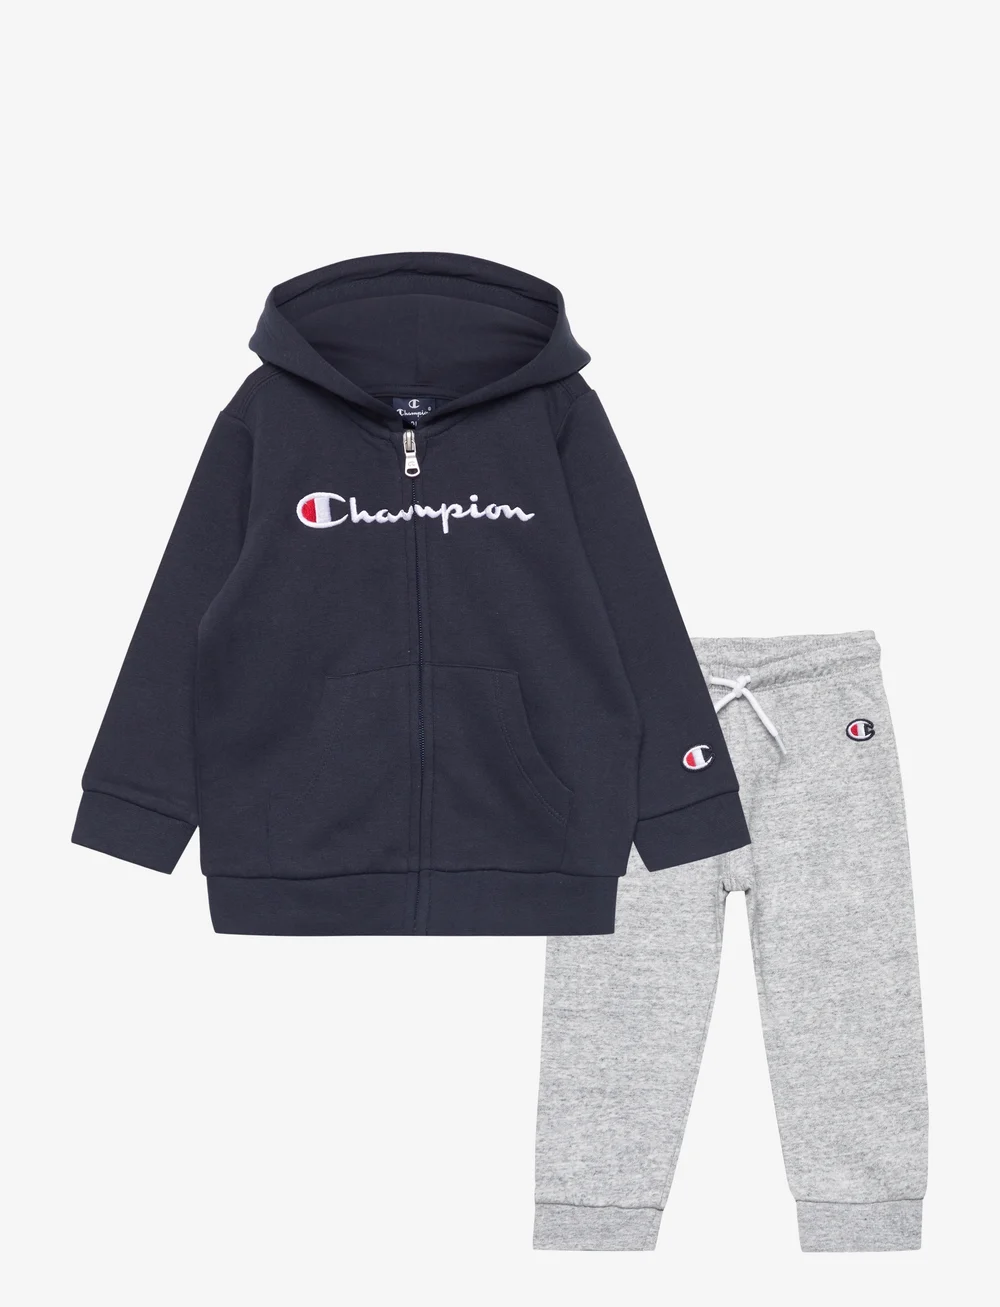 Champion Hooded Full Zip Suit - Sets